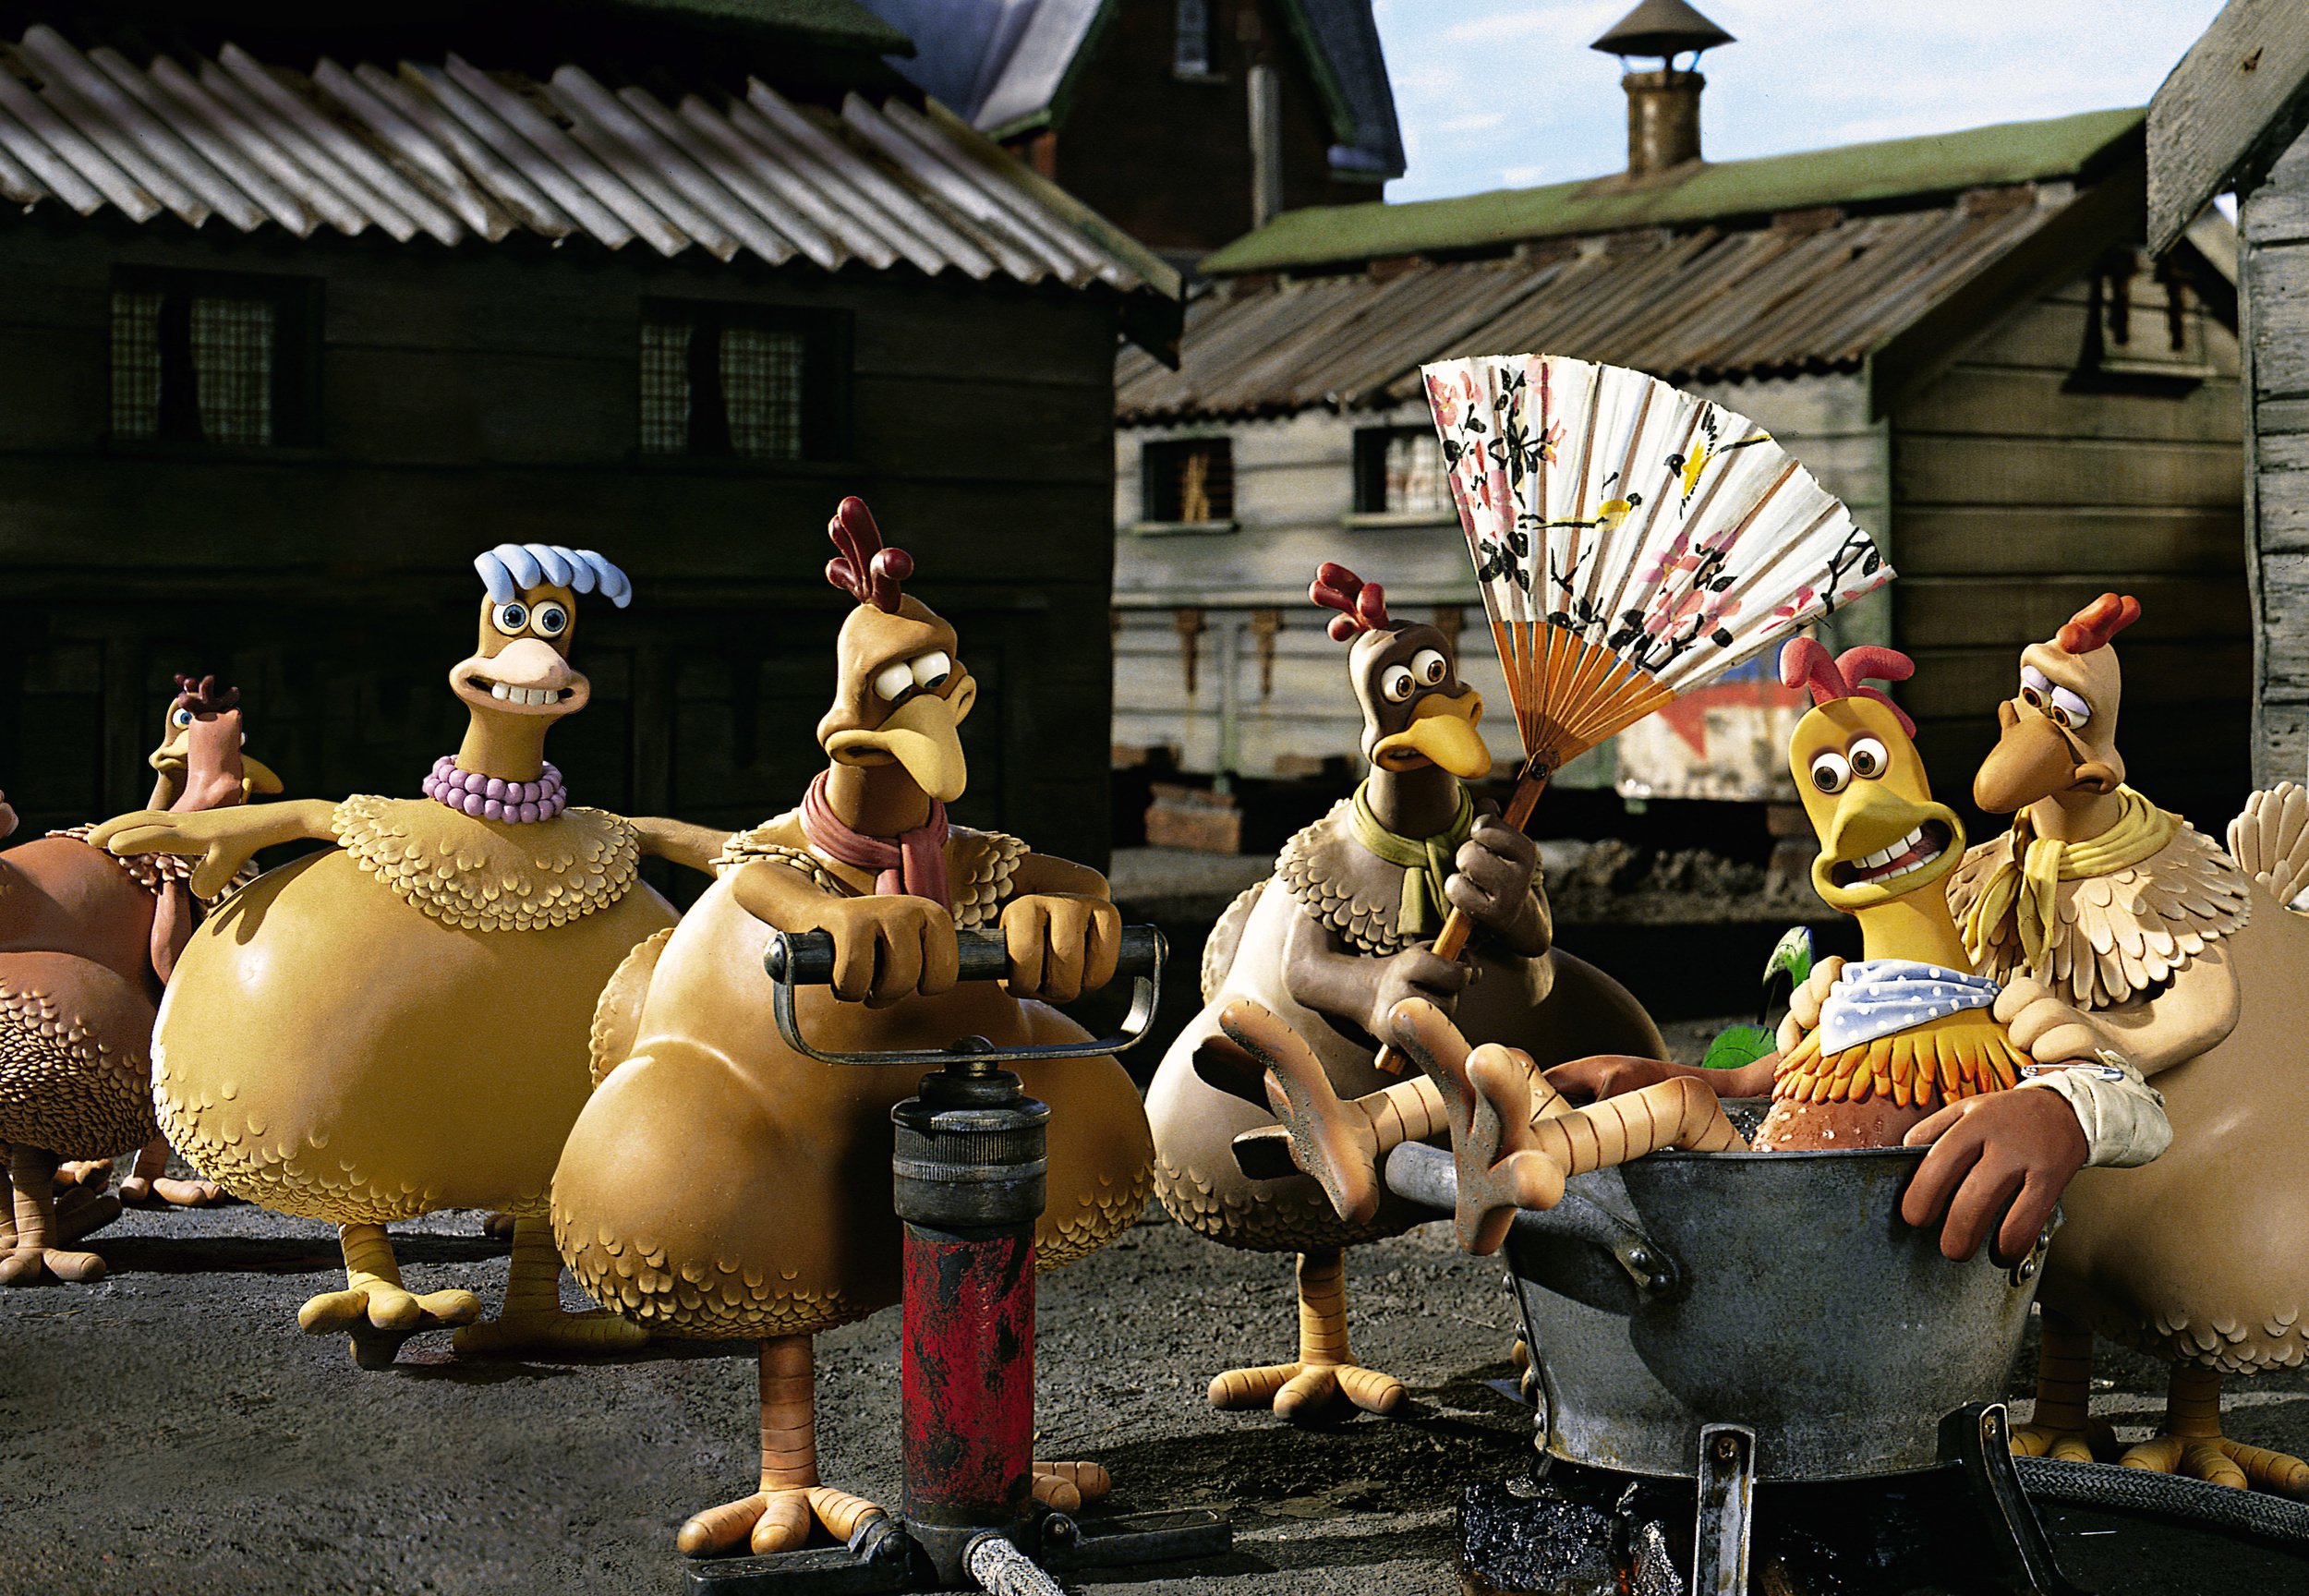 <p><em>Chicken Run</em> marked the first collaboration between DreamWorks and Aardman, as well as Aardman’s first-ever feature film. The 2000s comedy classic follows a rooster and chicken who plan an escape from their evil owners. <em>Chicken Run</em> was also the first feature film made using claymation, which has become Aardan’s signature style. The long-awaited and highly anticipated sequel, <em>Chicken Run: Dawn of the Nugget</em>, debuts in December 2023 on Netflix. </p><p>You may also like: <a href='https://www.yardbarker.com/entertainment/articles/deus_ex_machina_the_25_most_memorable_movie_robots_022924/s1__38897360'>Deus ex machina: The 25 most memorable movie robots</a></p>